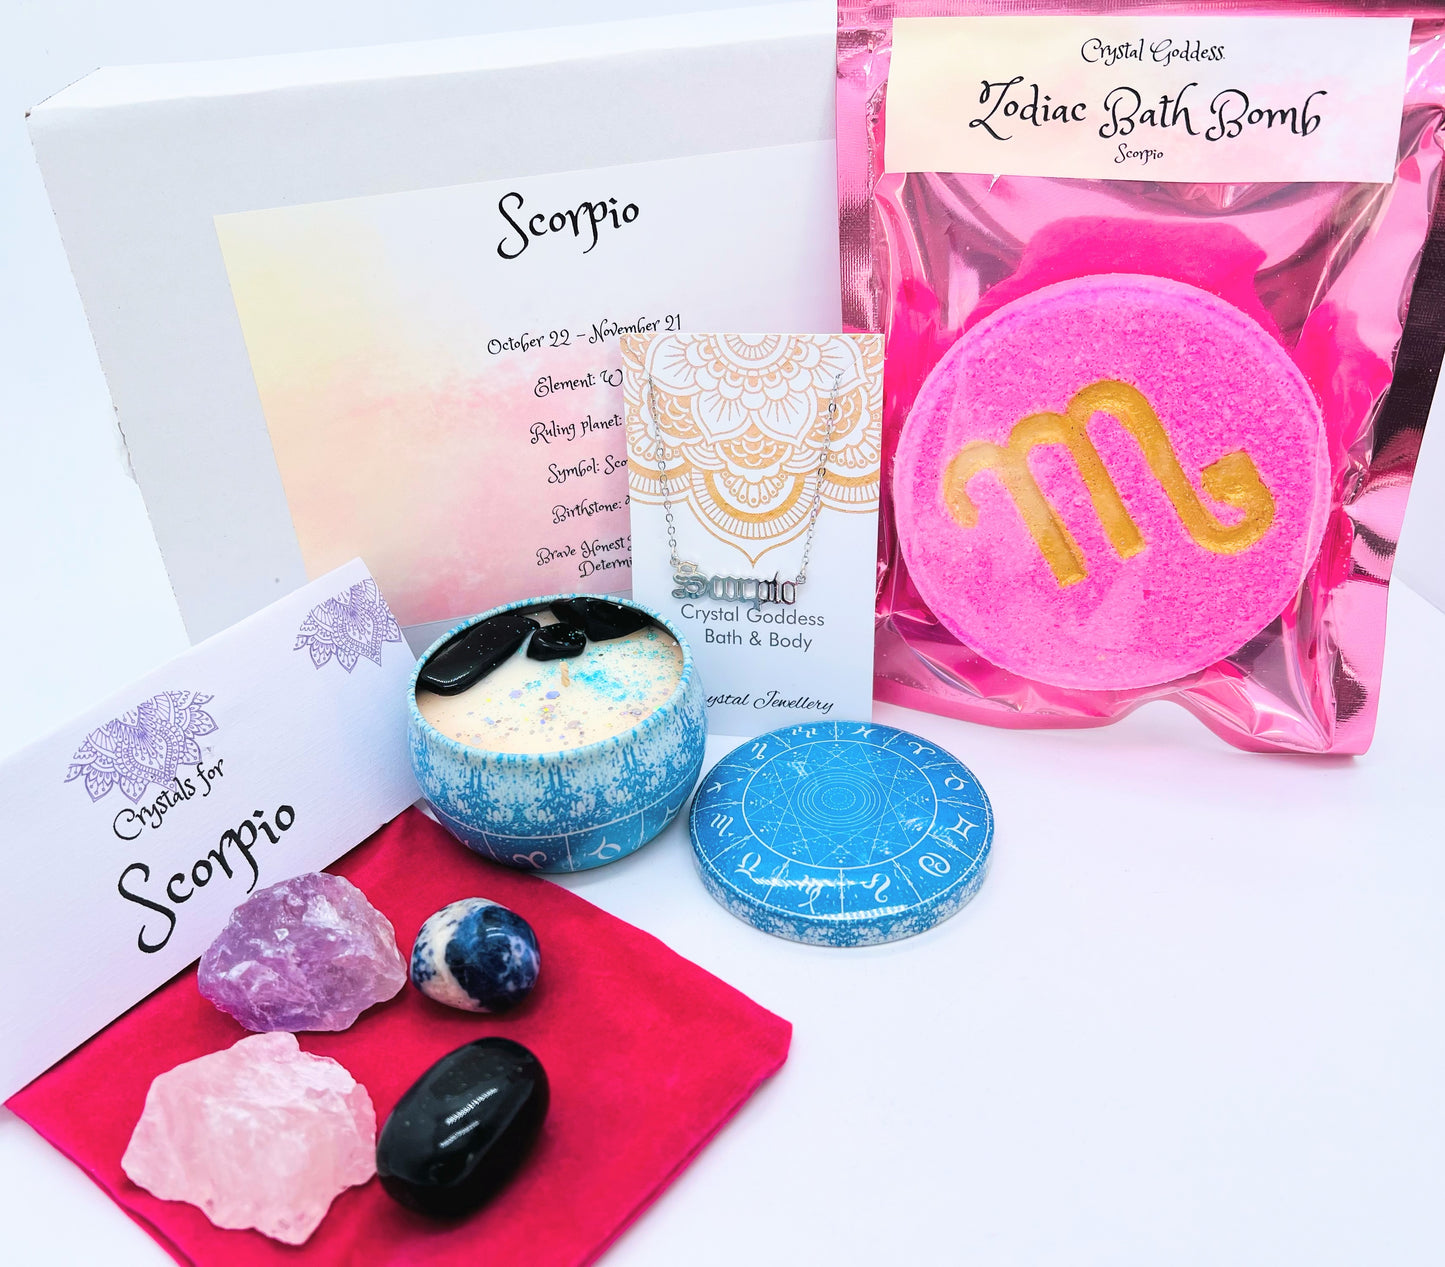 Scorpio zodiac gift box showing a set of four crystals, crystal candle, pendant and a bath bomb with the symbol for this sign on it.